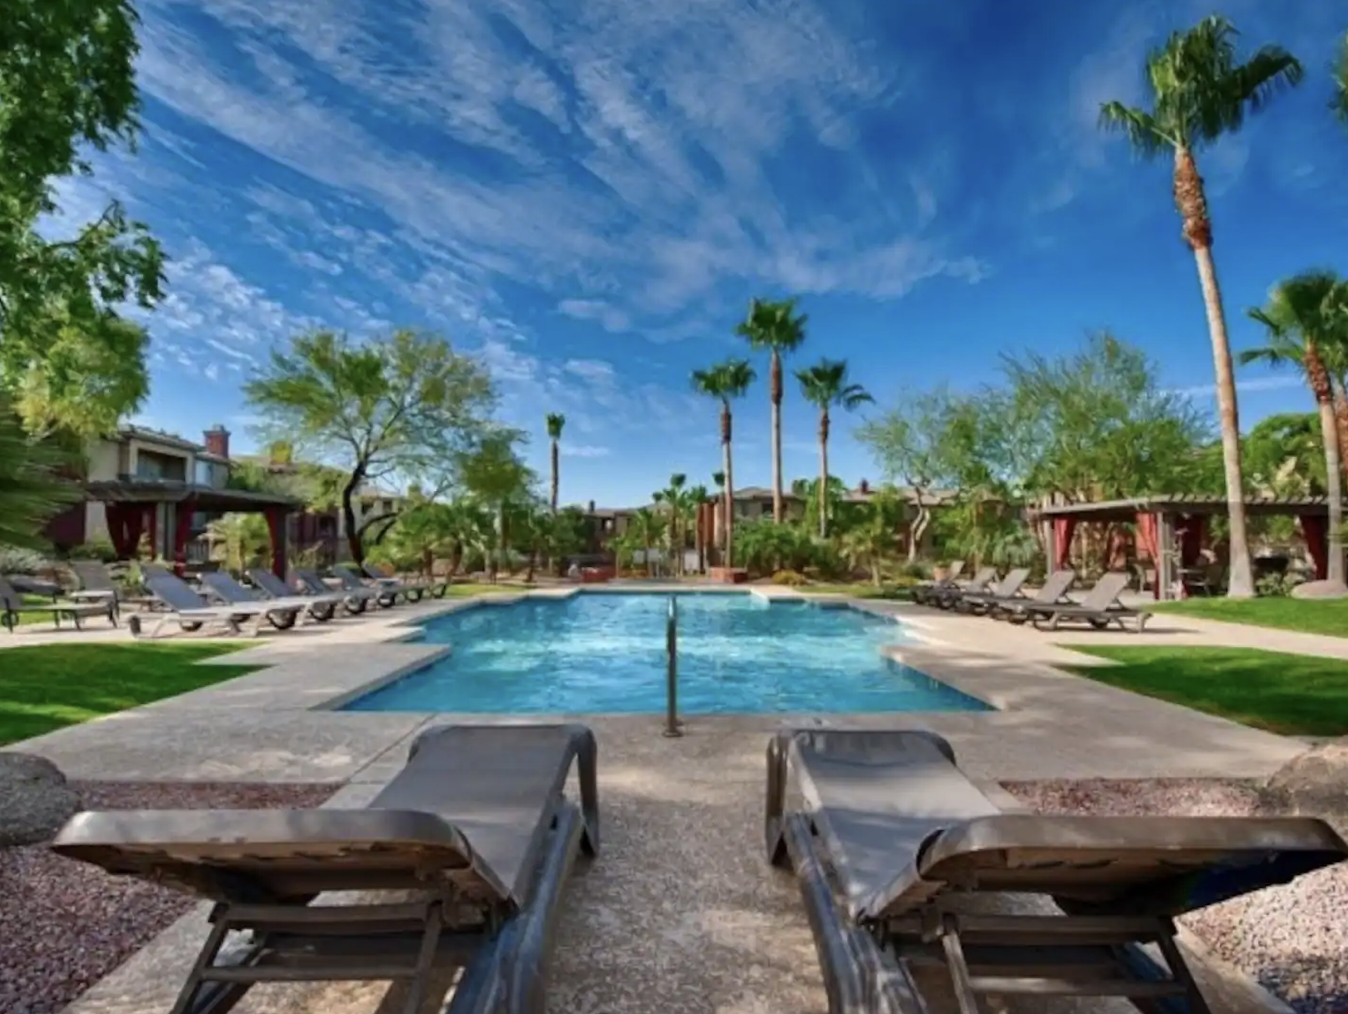 Unwind from your desert adventure in the sparkling heated pool, hot tub, or putting green just steps from condo.